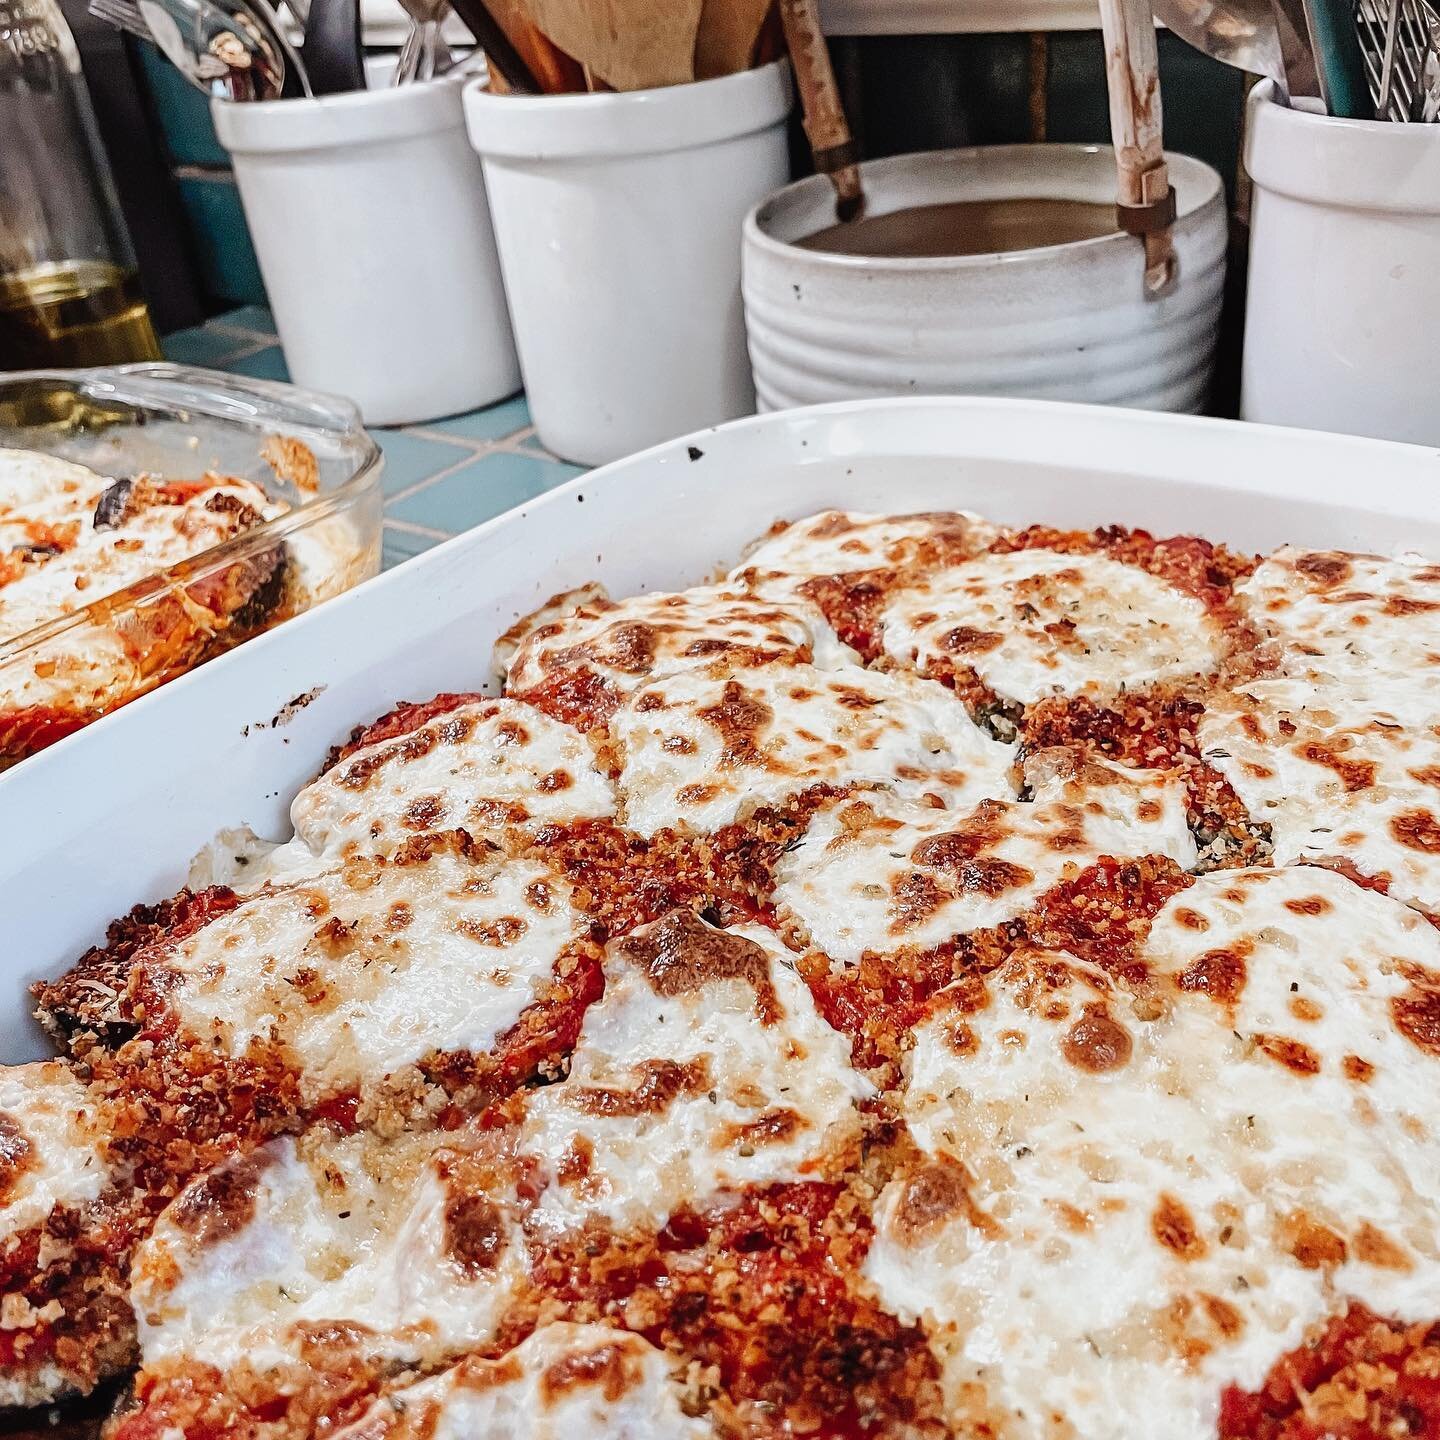 I branched out from lasagna into eggplant parm&hellip; 🤤 i never used to like it, but fresh mozzarella makes the whole difference. Holy wow deliciousness!! 

#vegetarianrecipes #learnsomethingneweveryday #goodtomama